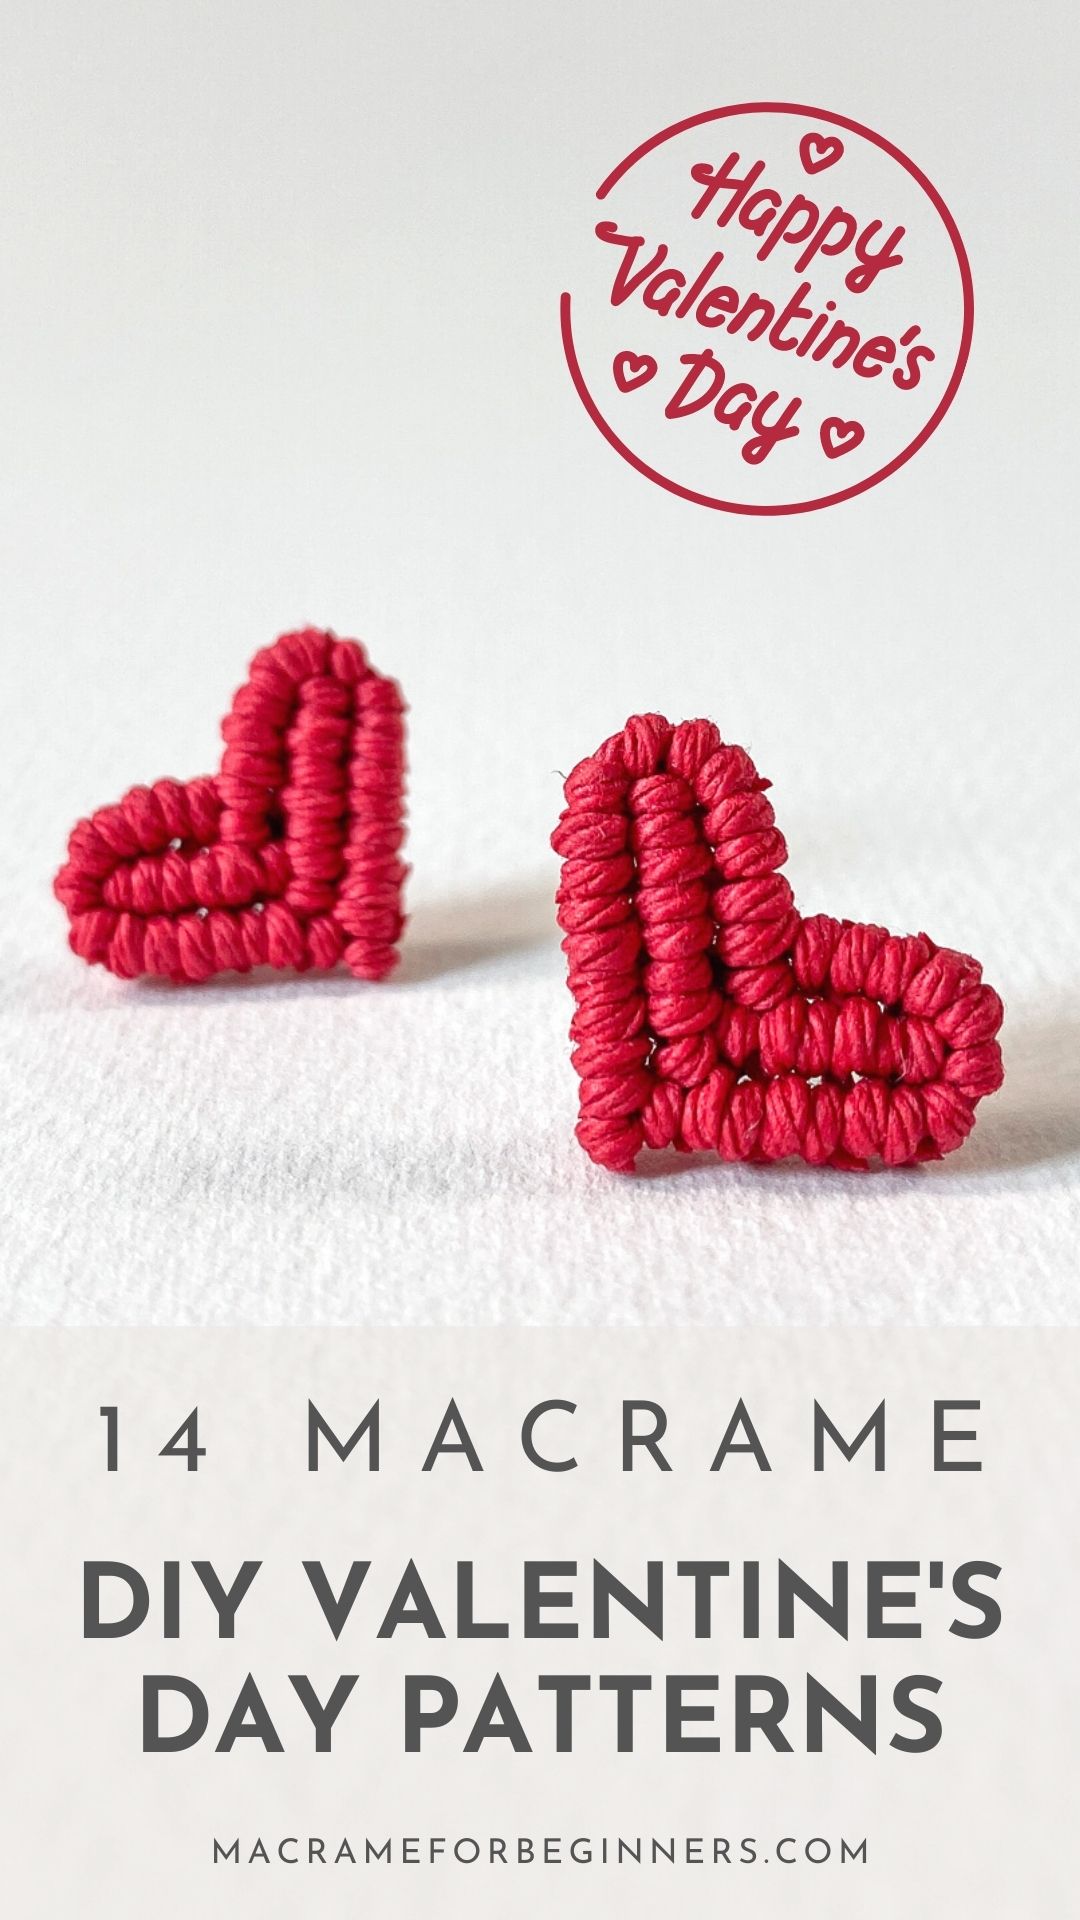 14 Lovely Macrame Valentine's Day Projects for Beginners - Macrame for Beginners 